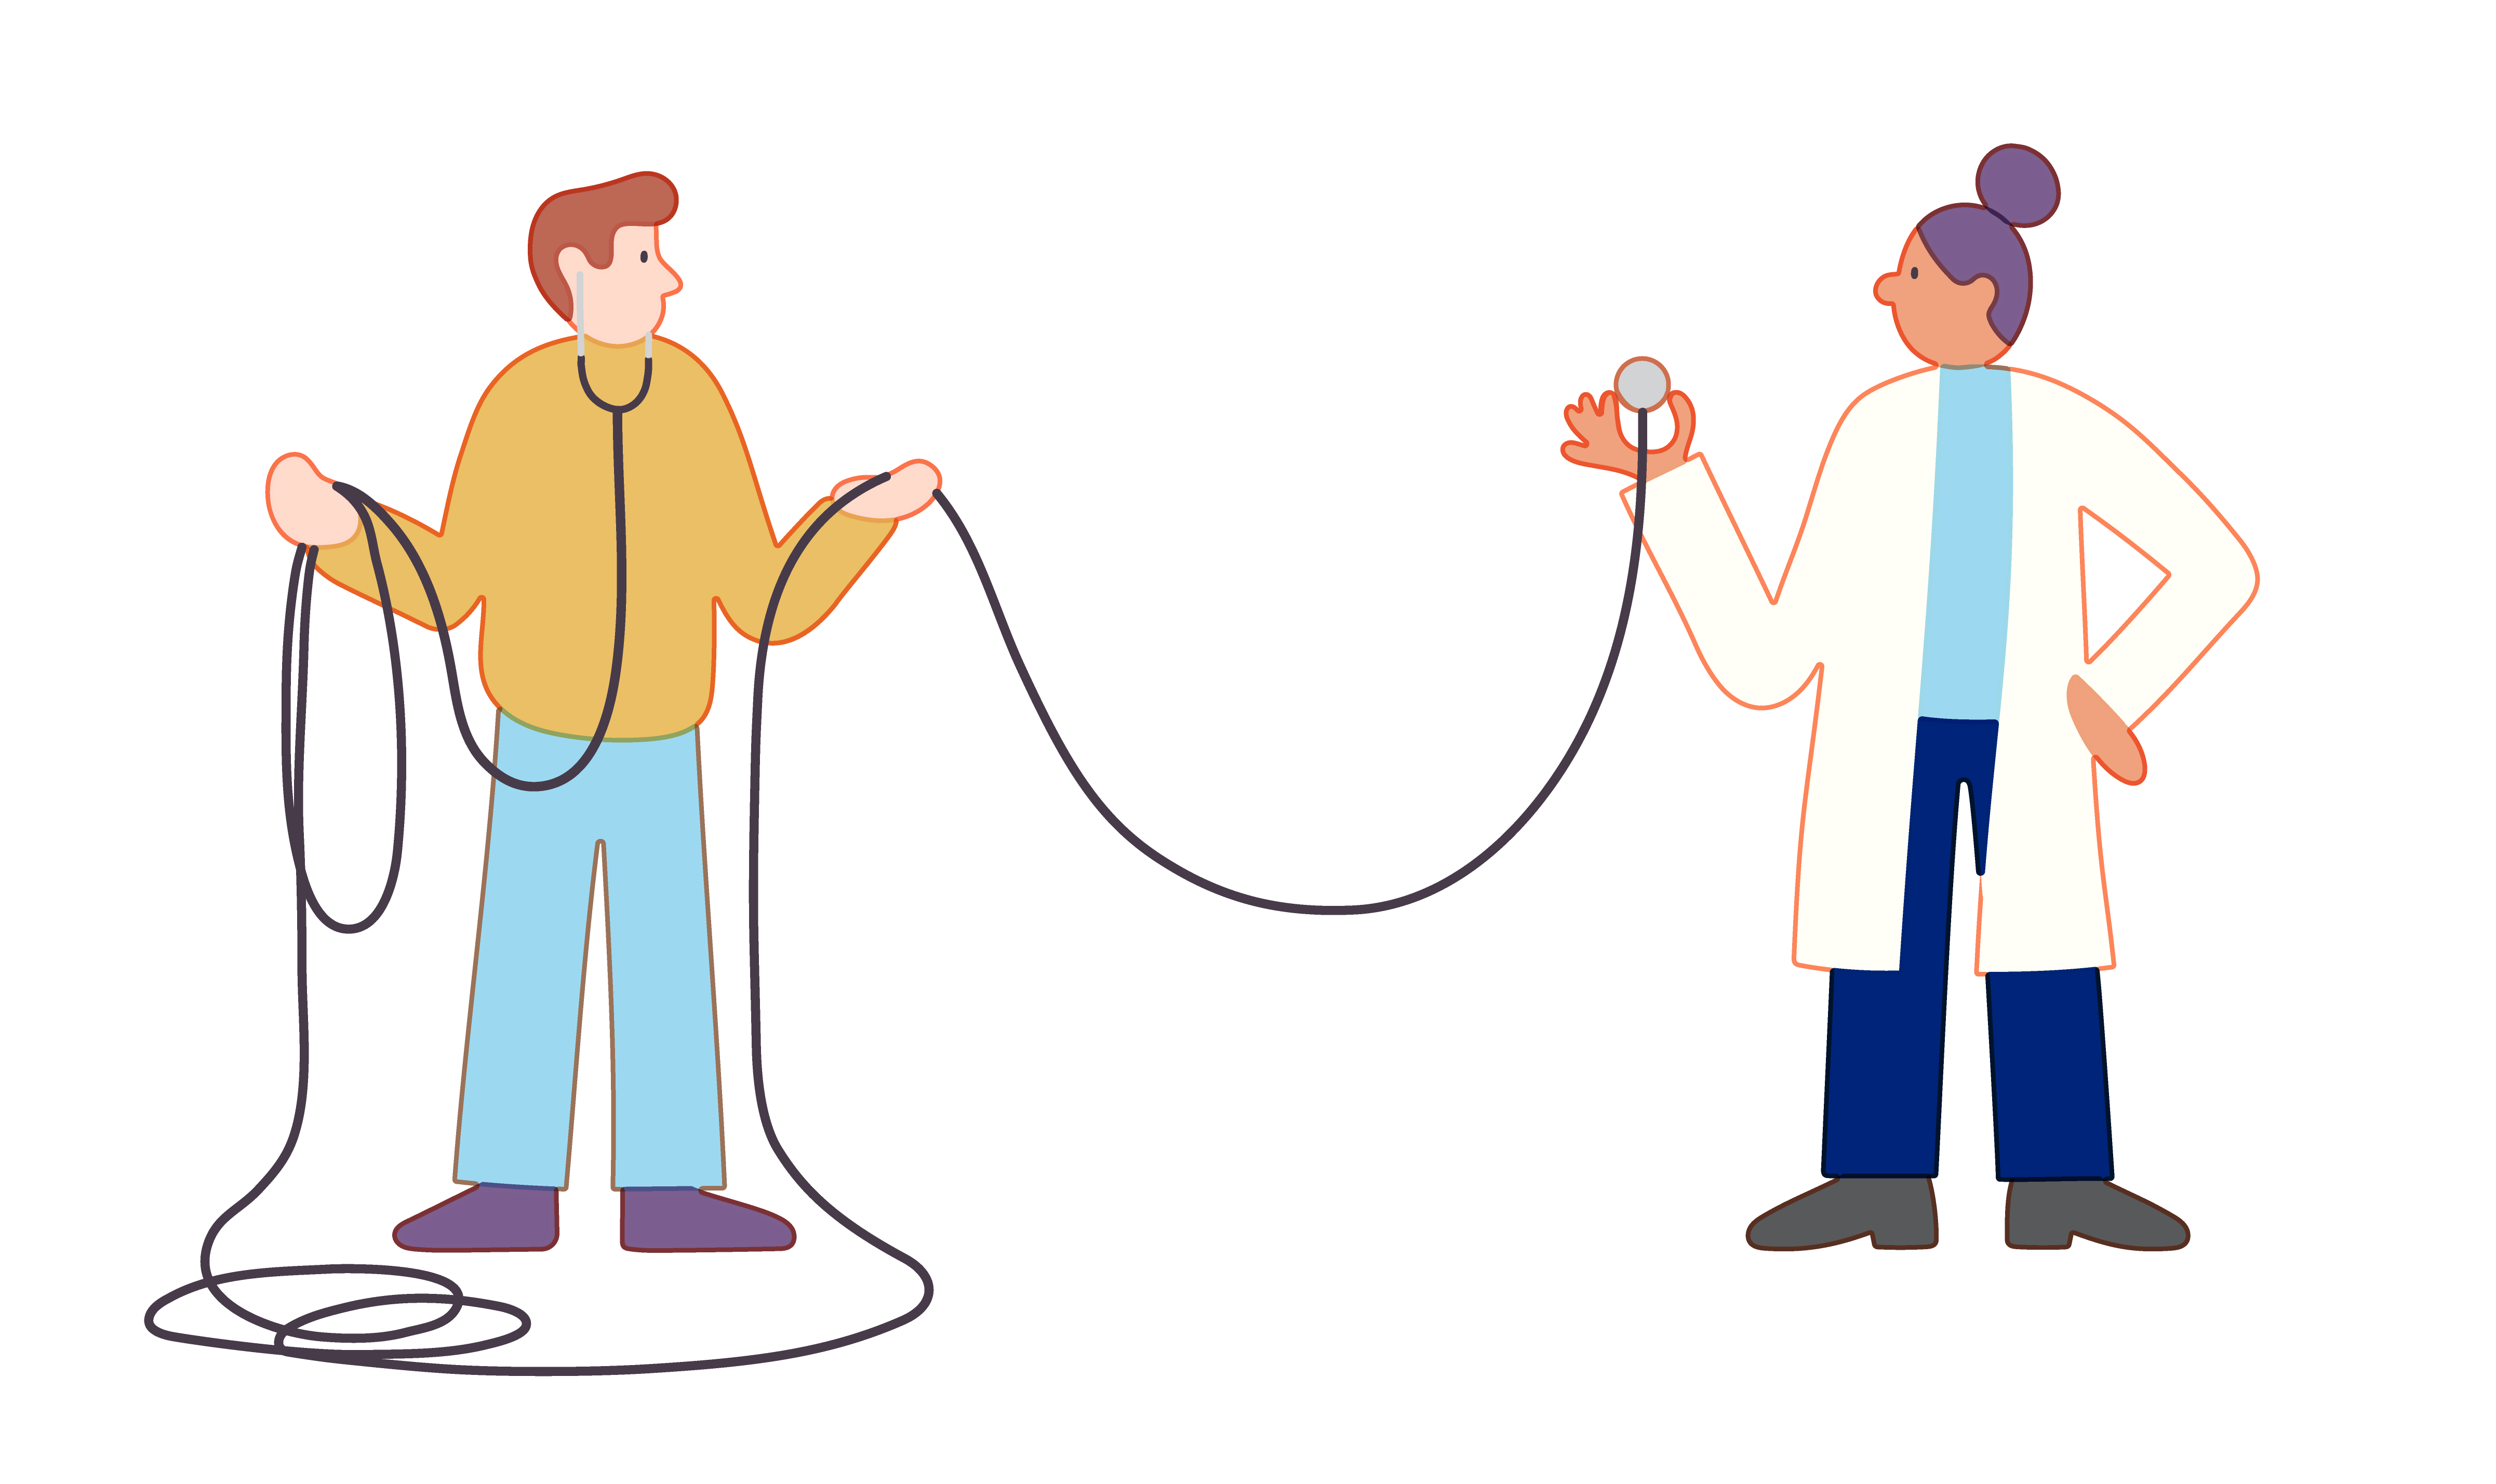 A doctor and her patient are connected through a super long stethoscope.